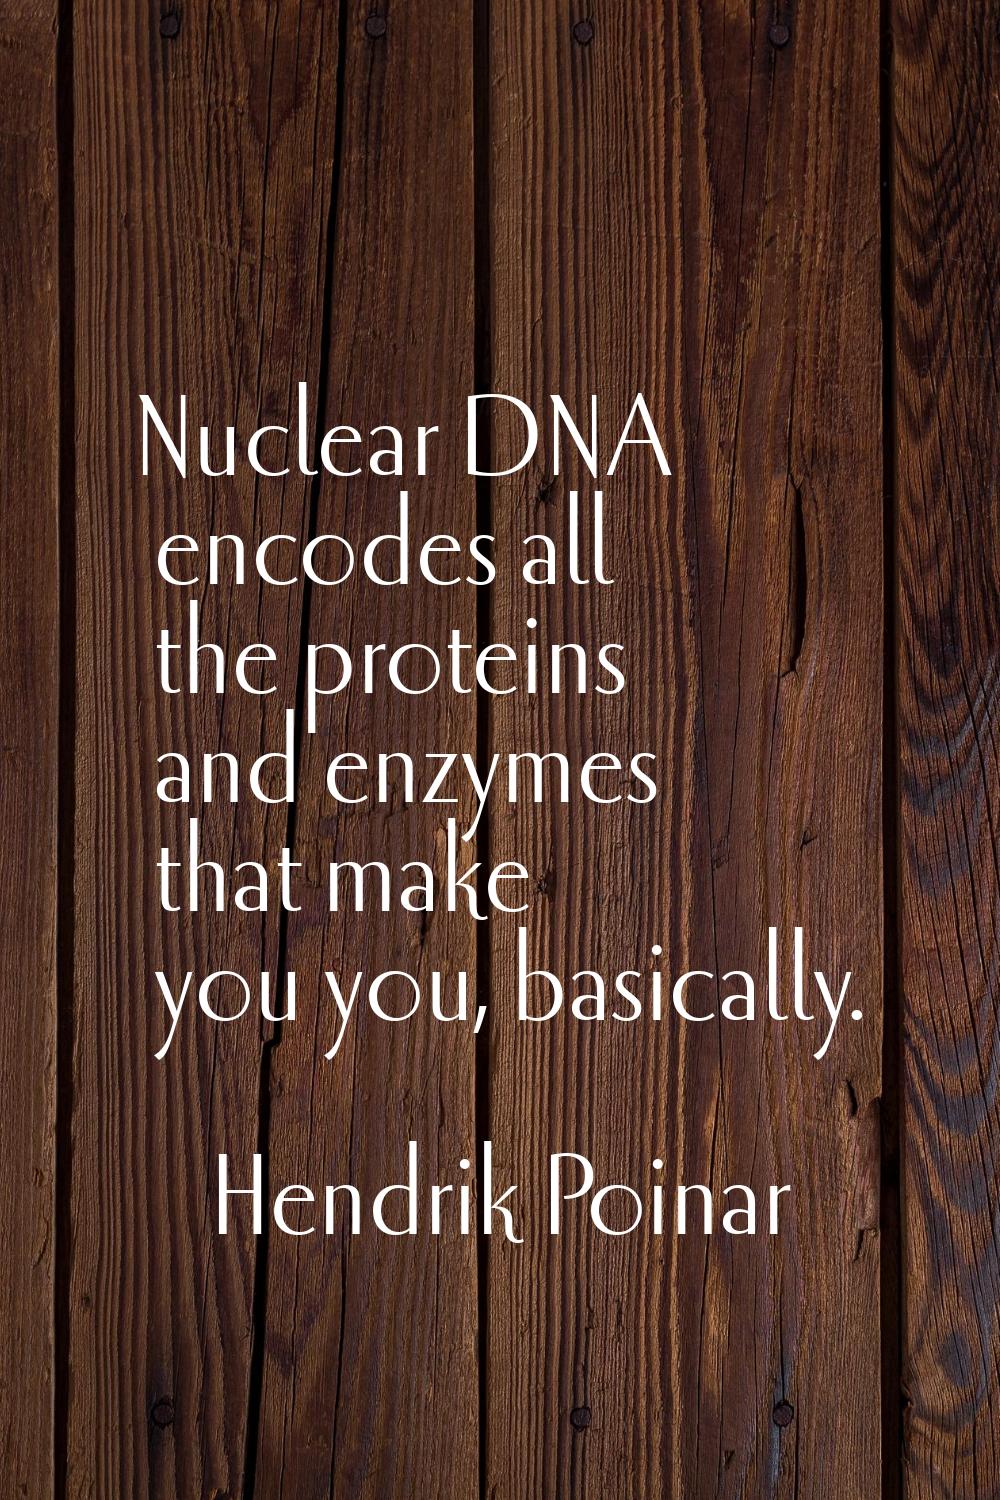 Nuclear DNA encodes all the proteins and enzymes that make you you, basically.